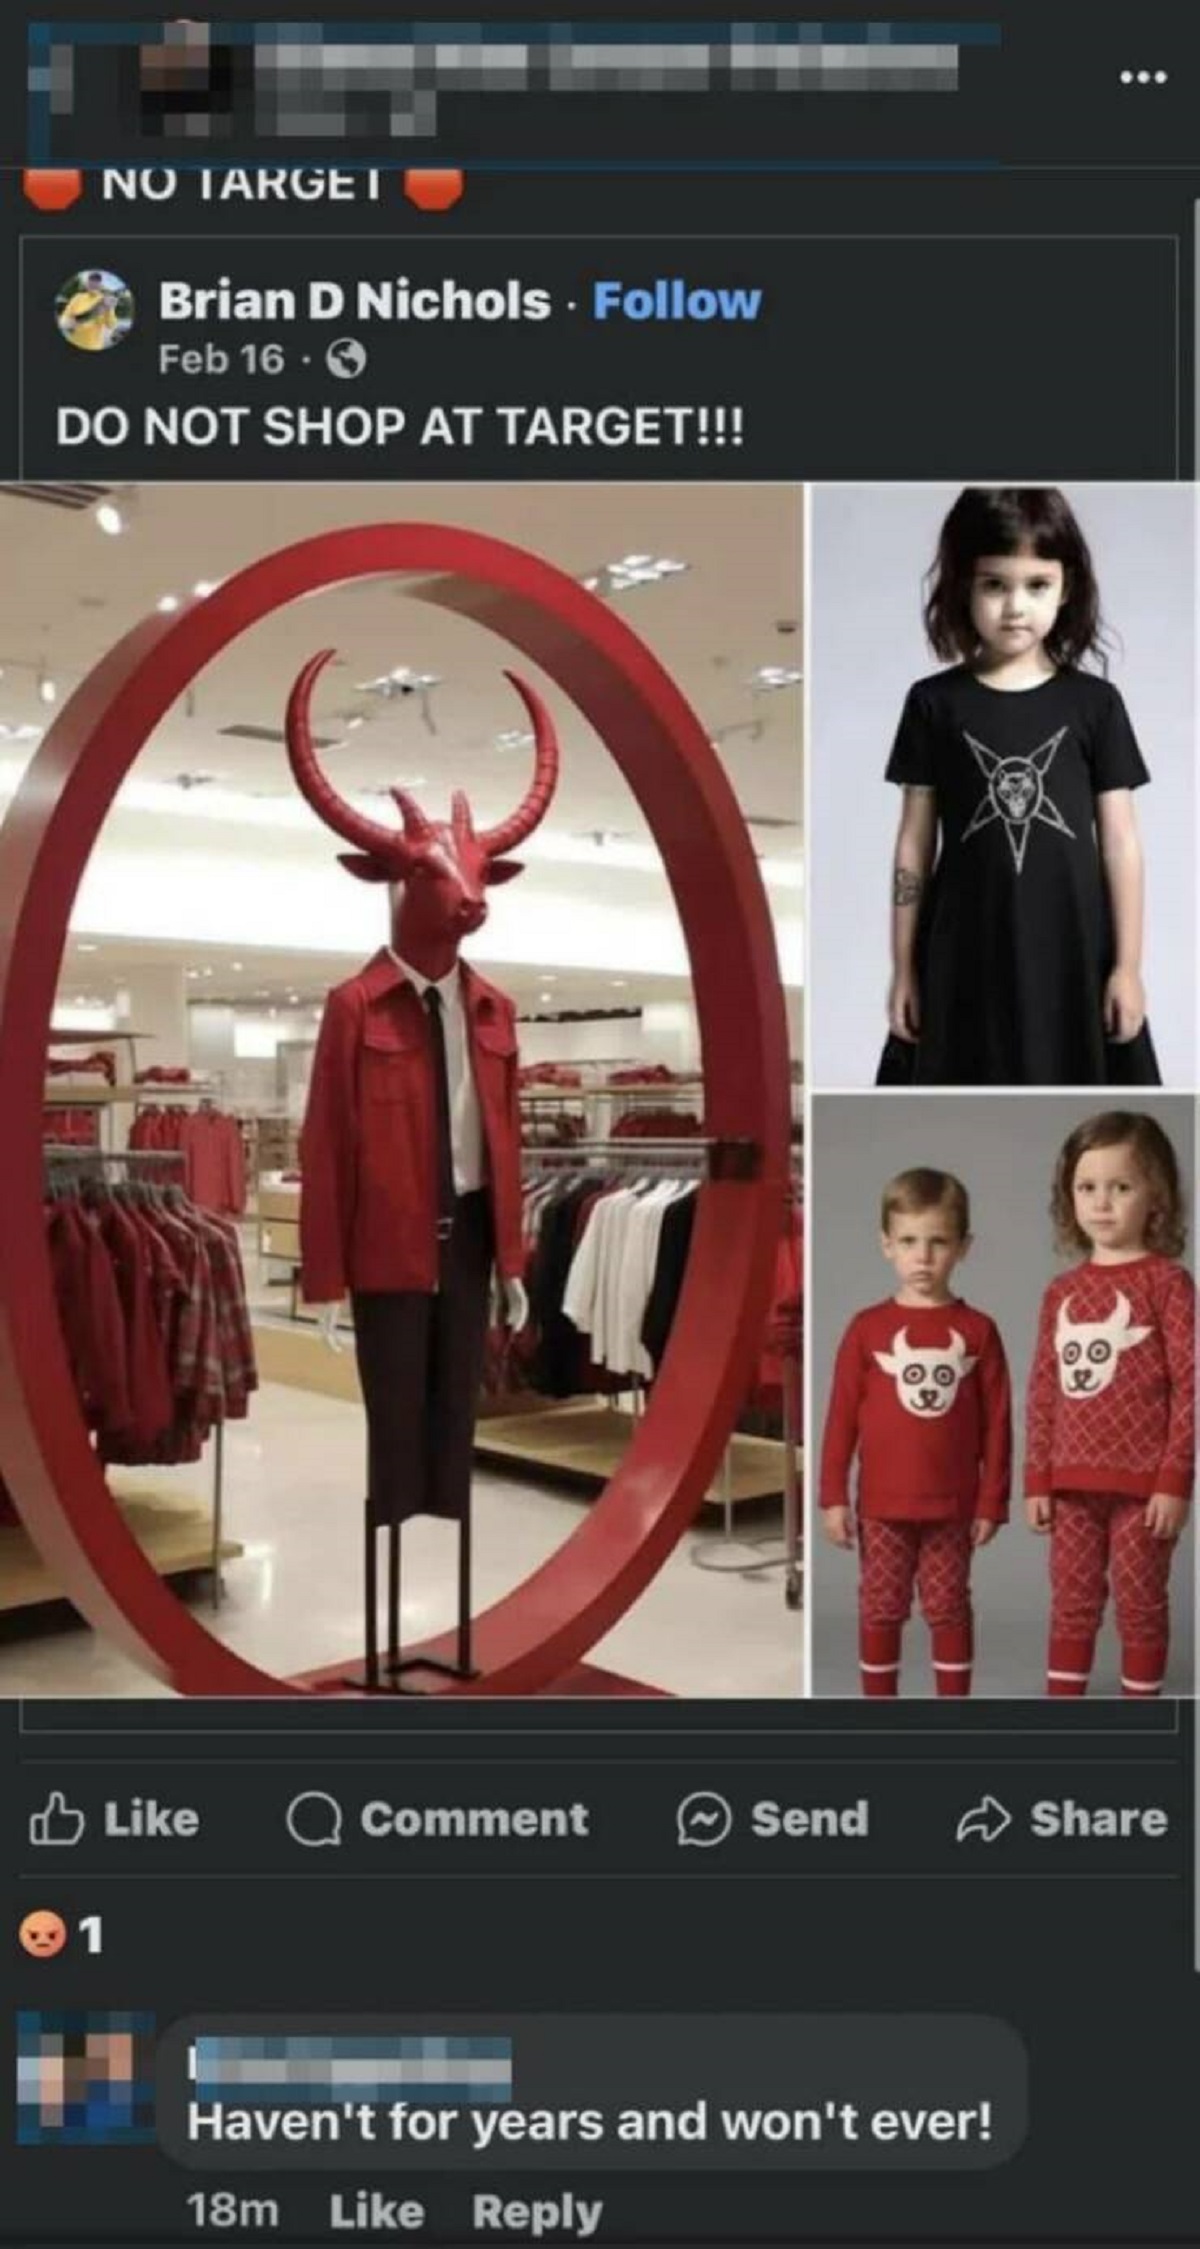 target devil mannequin - No Target Brian D Nichols Feb 16. Do Not Shop At Target!!! Comment Send Haven't for years and won't ever! 18m